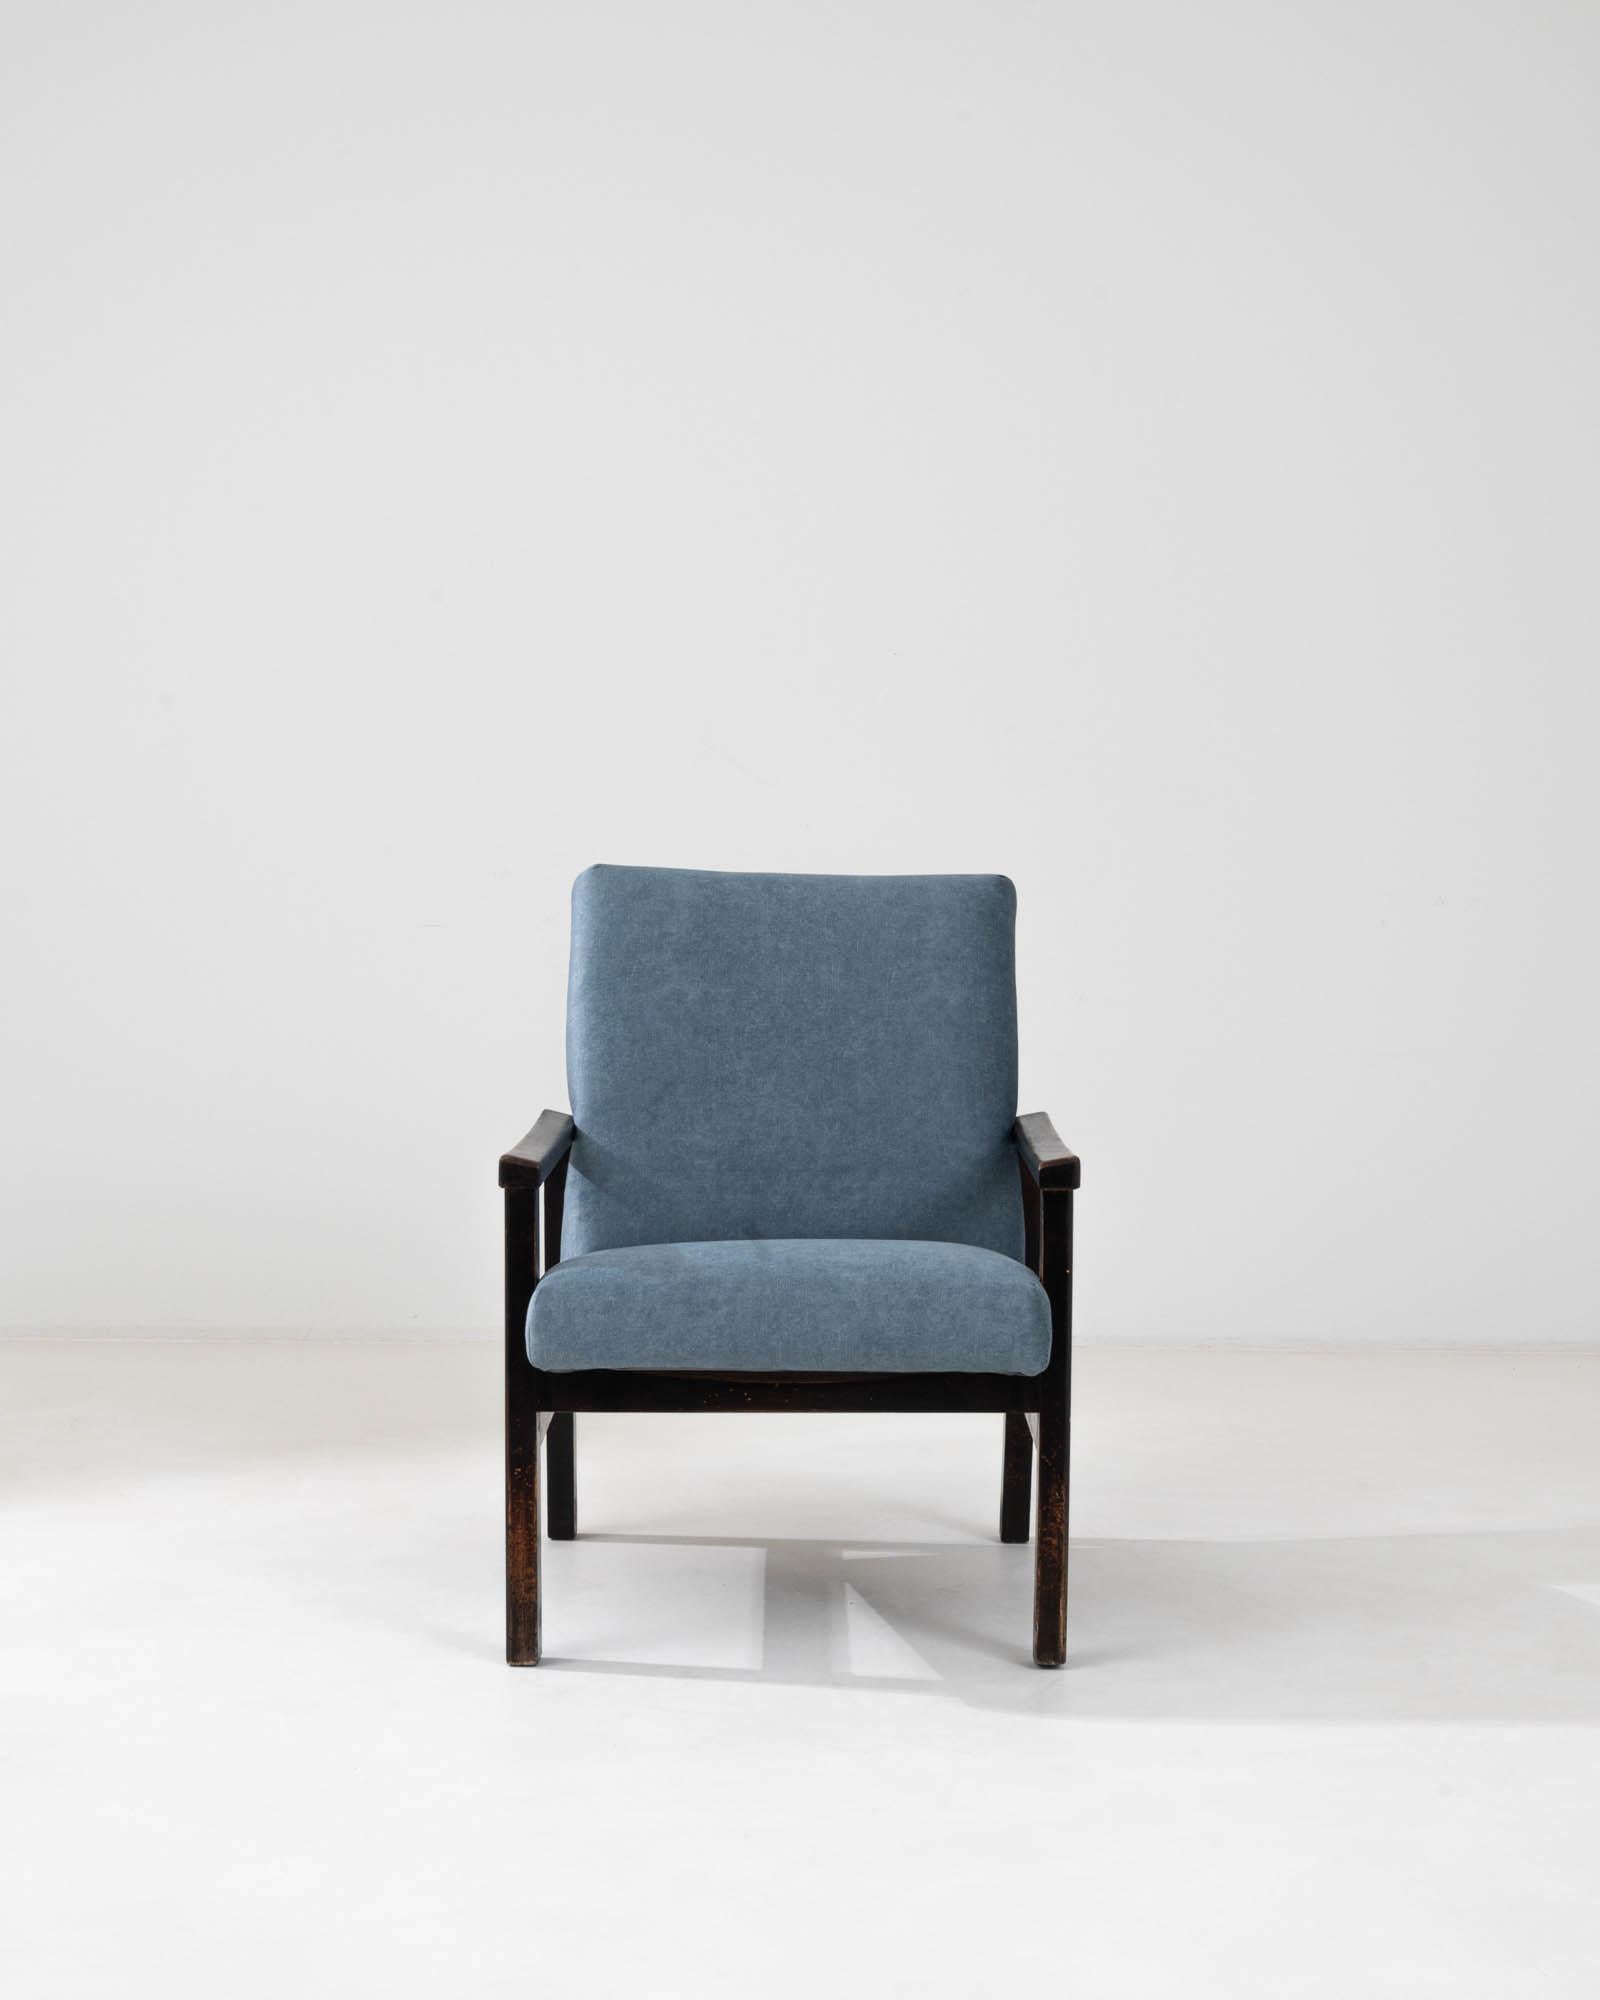 Introducing the essence of 1960s charm with this Czech upholstered armchair, a testament to timeless design and comfort. The chair's body is swathed in a serene, ocean-blue upholstery that whispers both calm and sophistication. Its wooden frame,